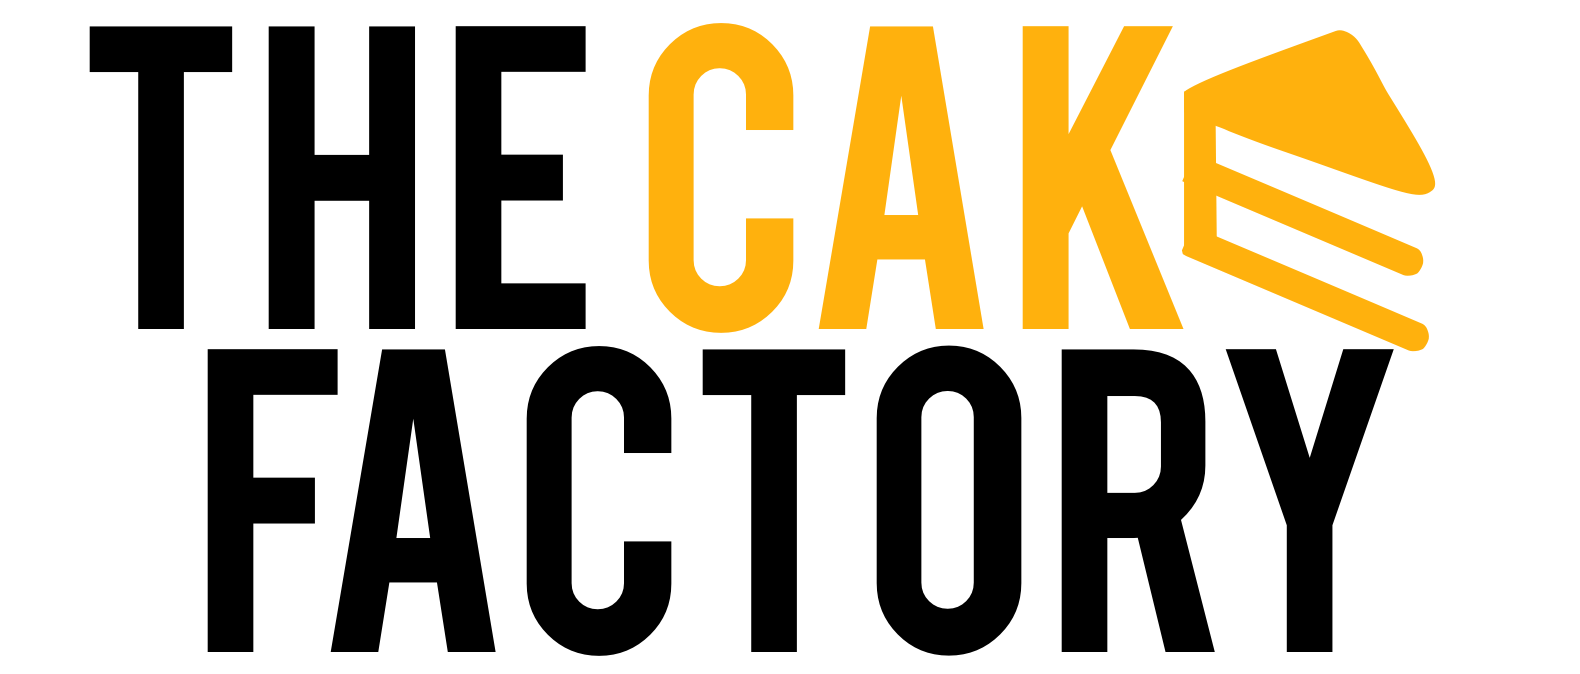 Your one stop shop for all things cake!